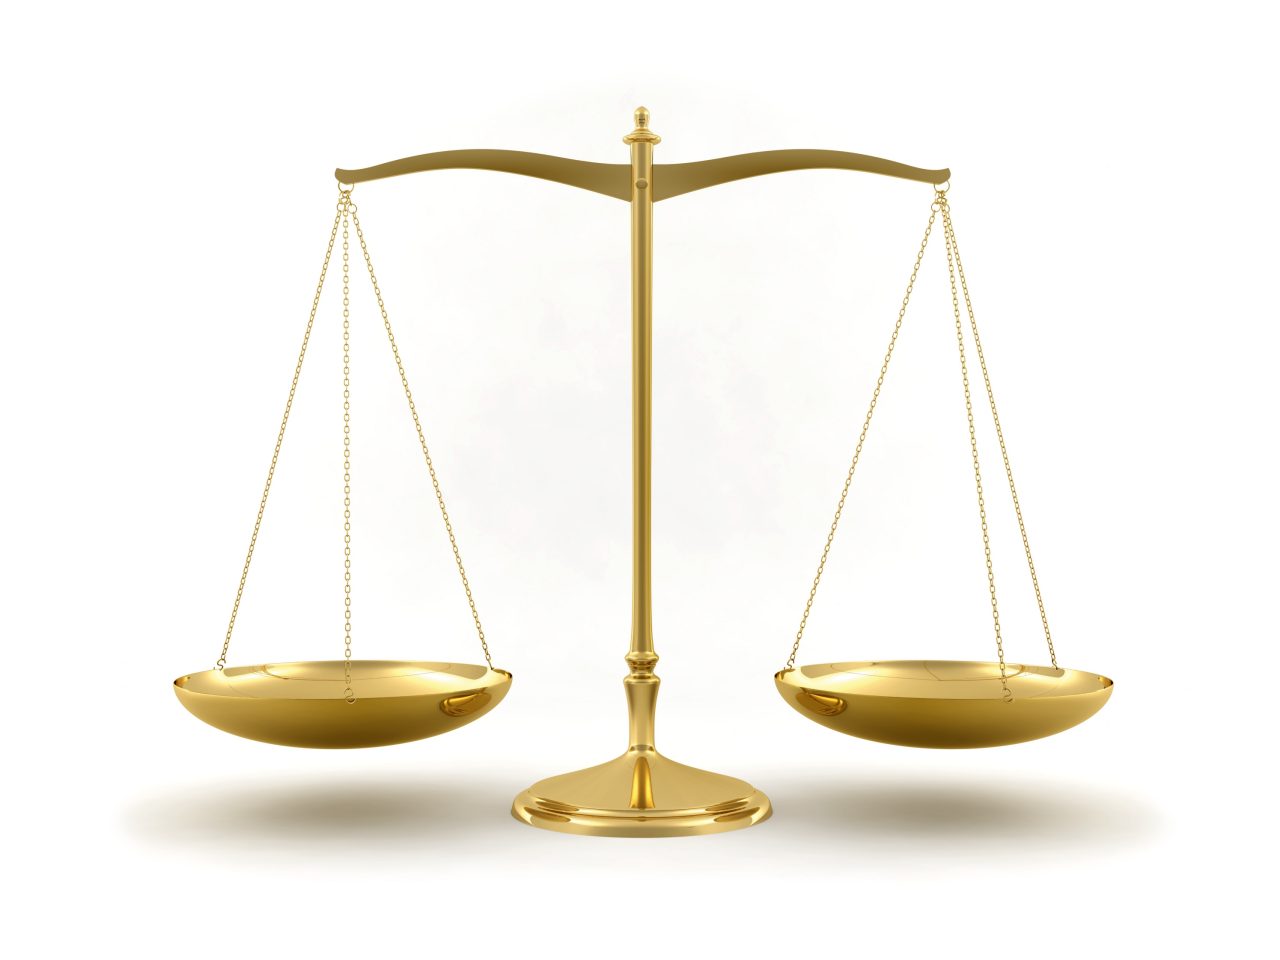 Gold scale isolated on white background. Law and justice concept.